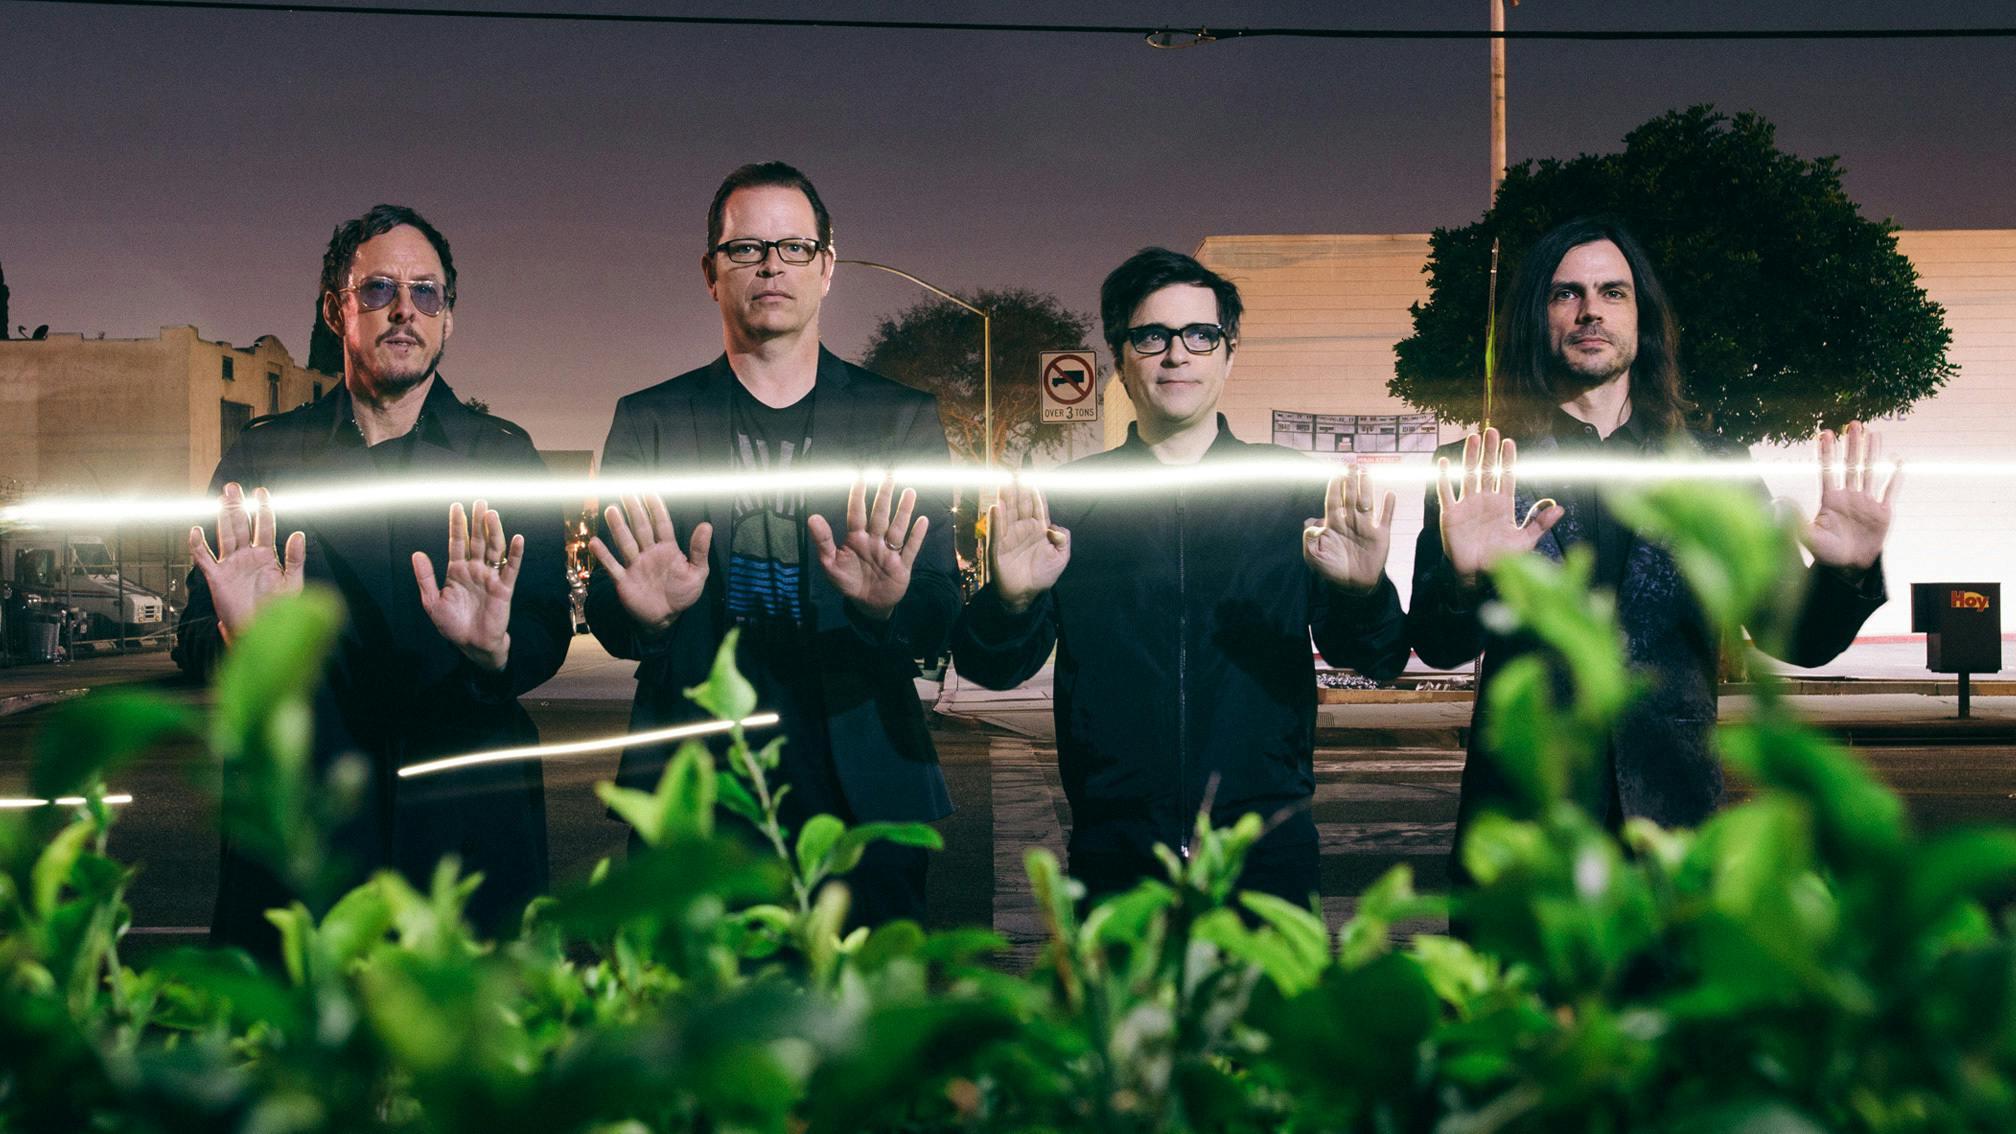 Weezer's Rivers Cuomo: "I Have The Negative Thoughts I Had When I Started"